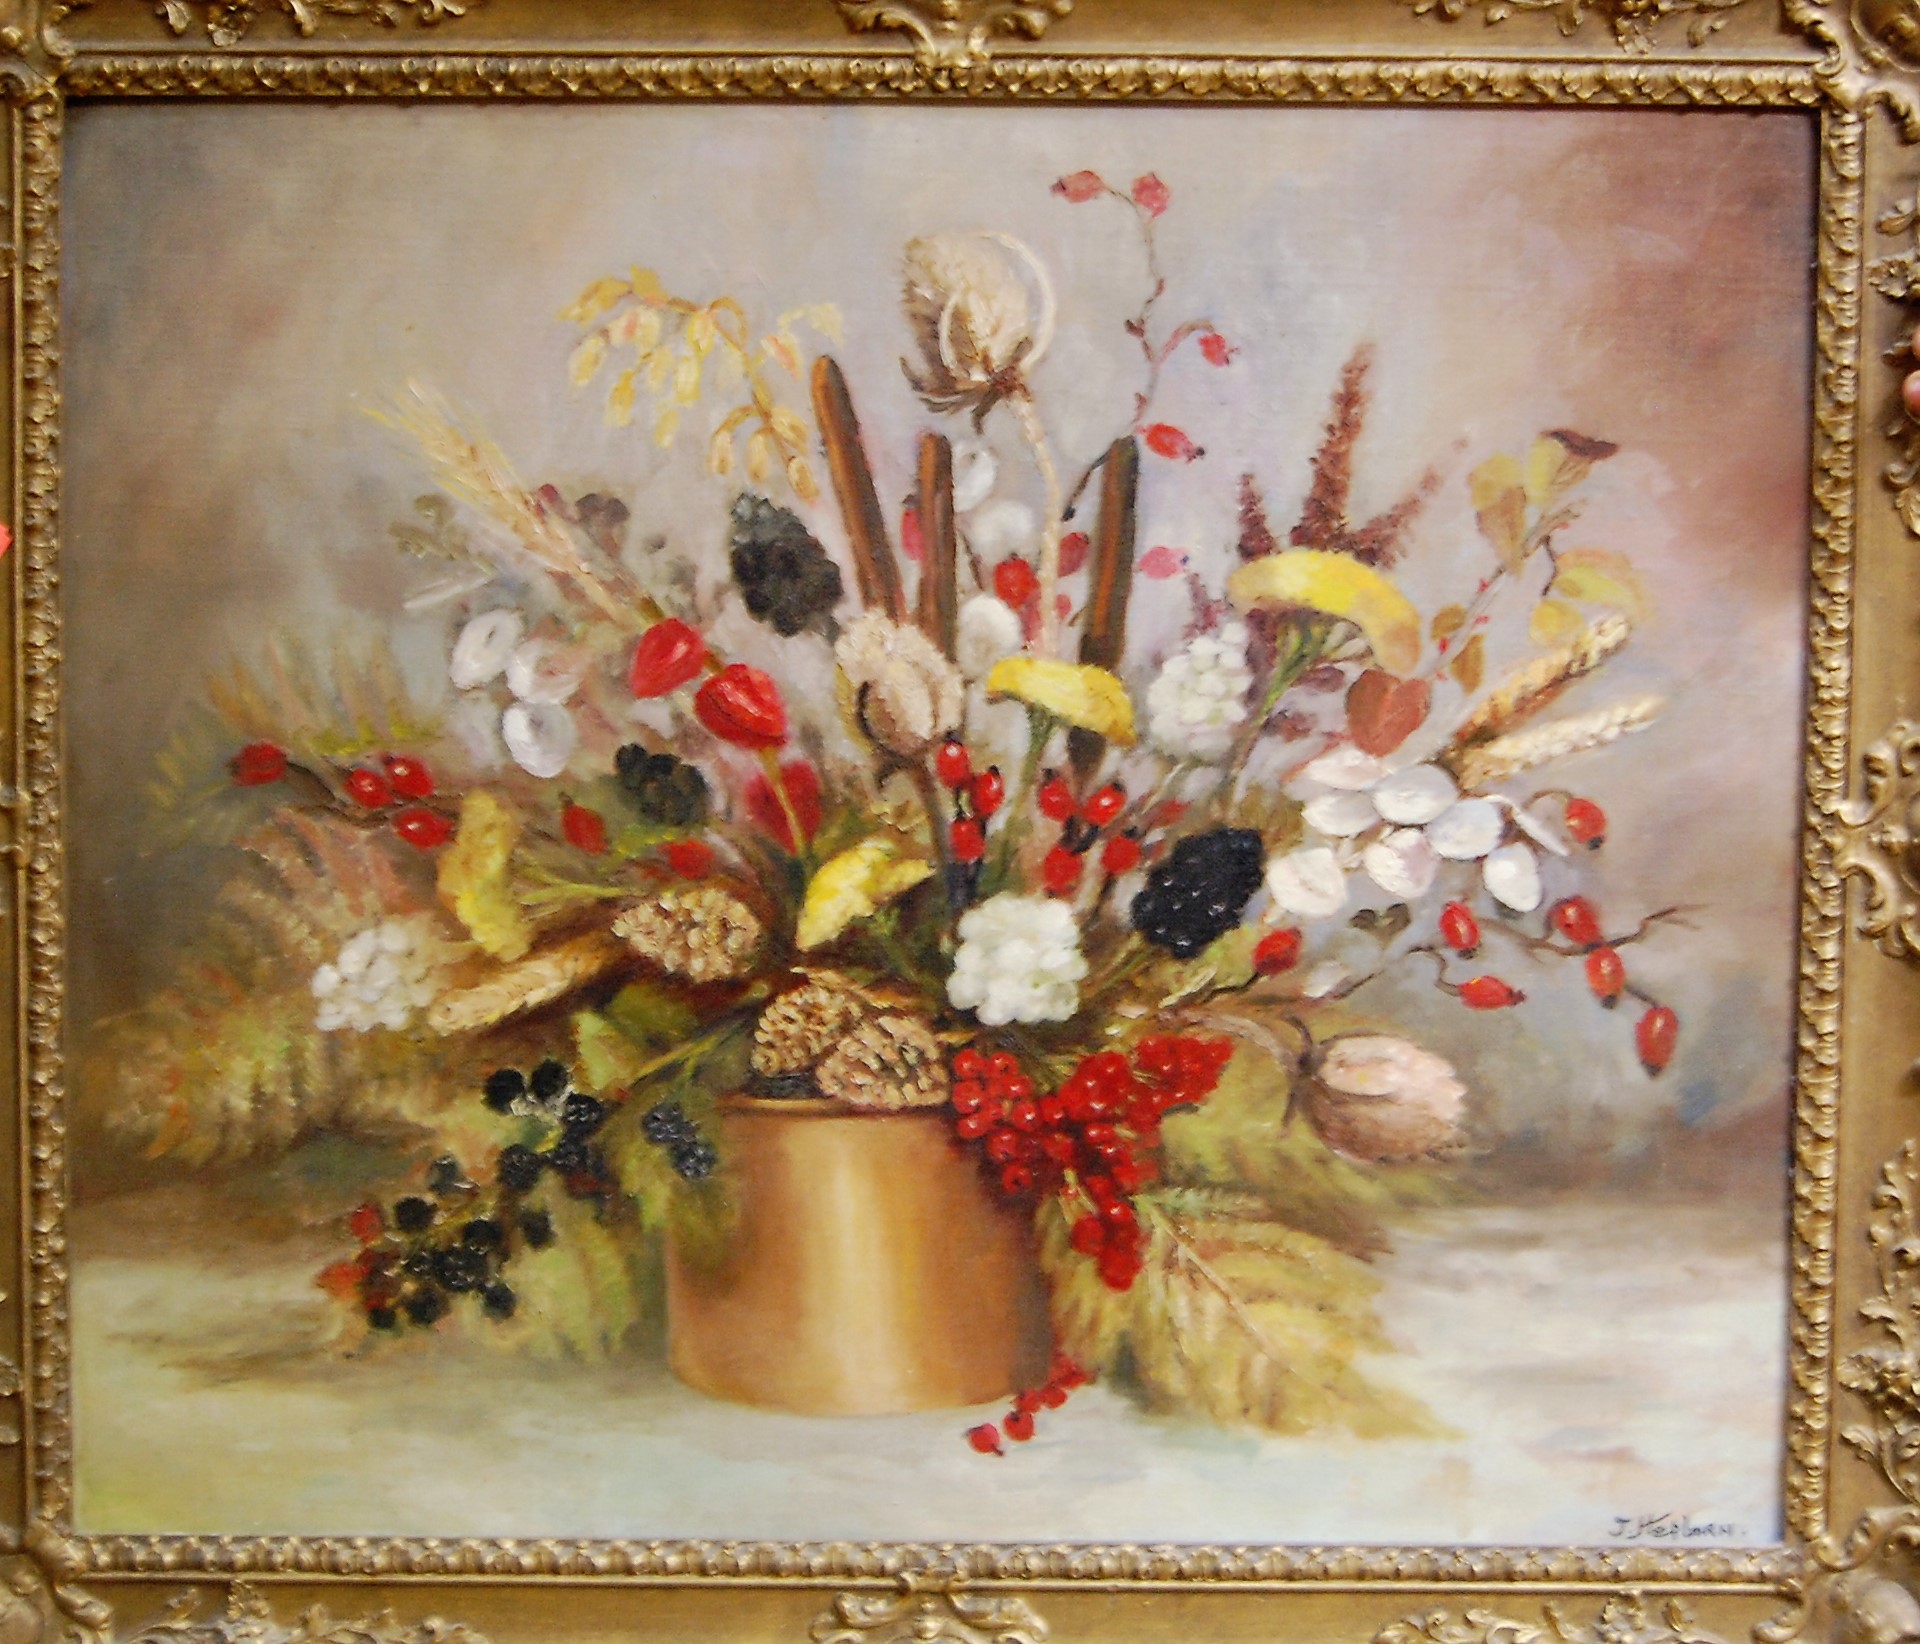 J Hepburn - Still life with wildflowers in a copper pot, oil on board, signed lower right, 50 x